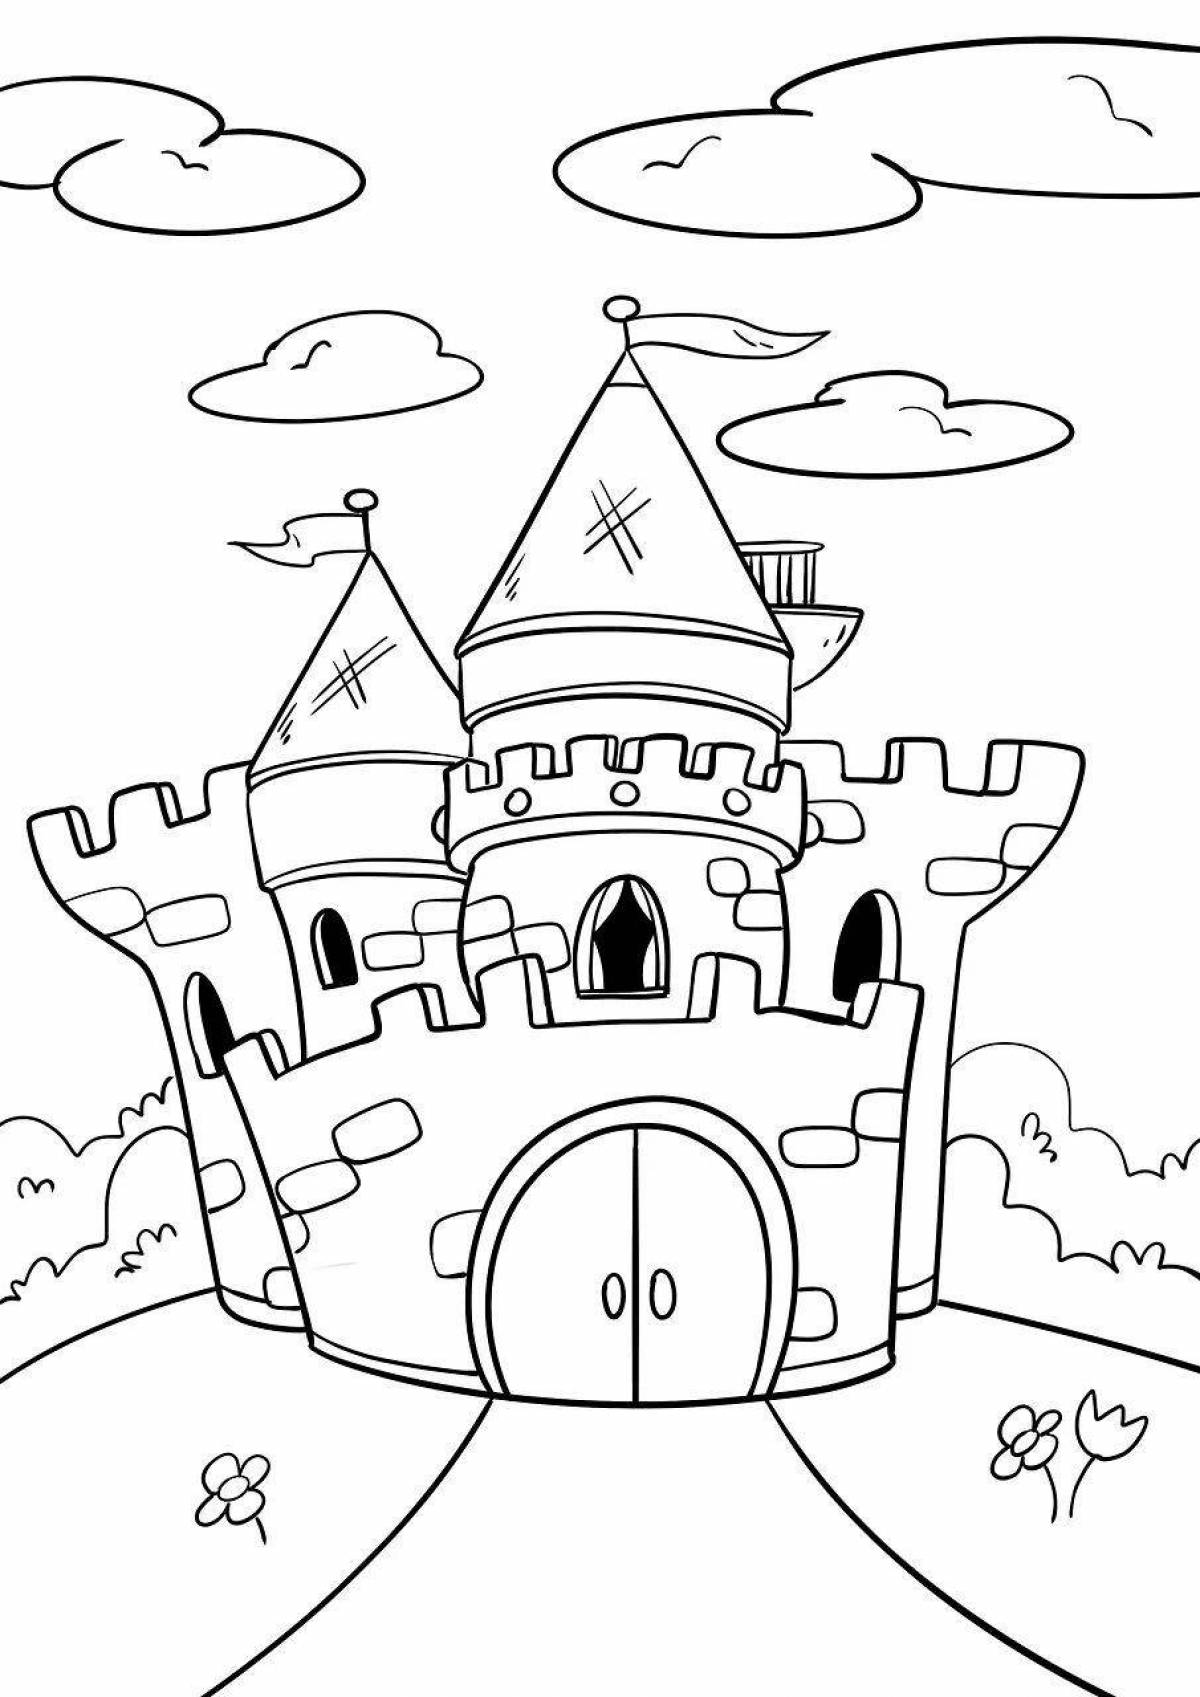 Luxury castle coloring book for 4-5 year olds